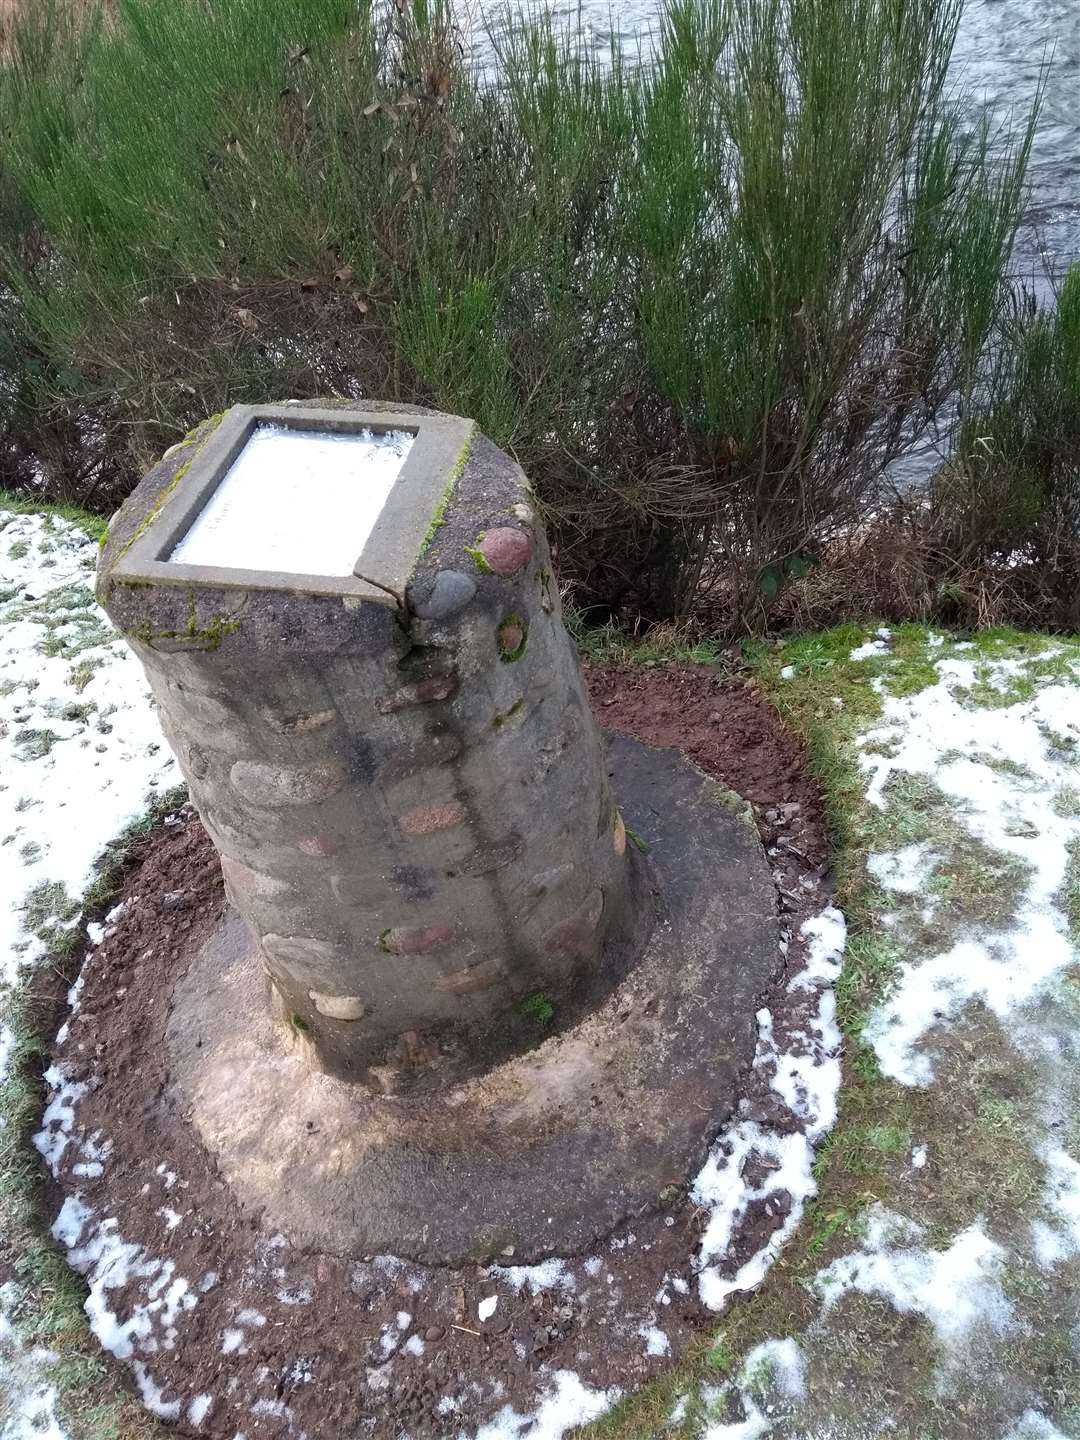 The memorial cairn is under threat of ending up in the river.